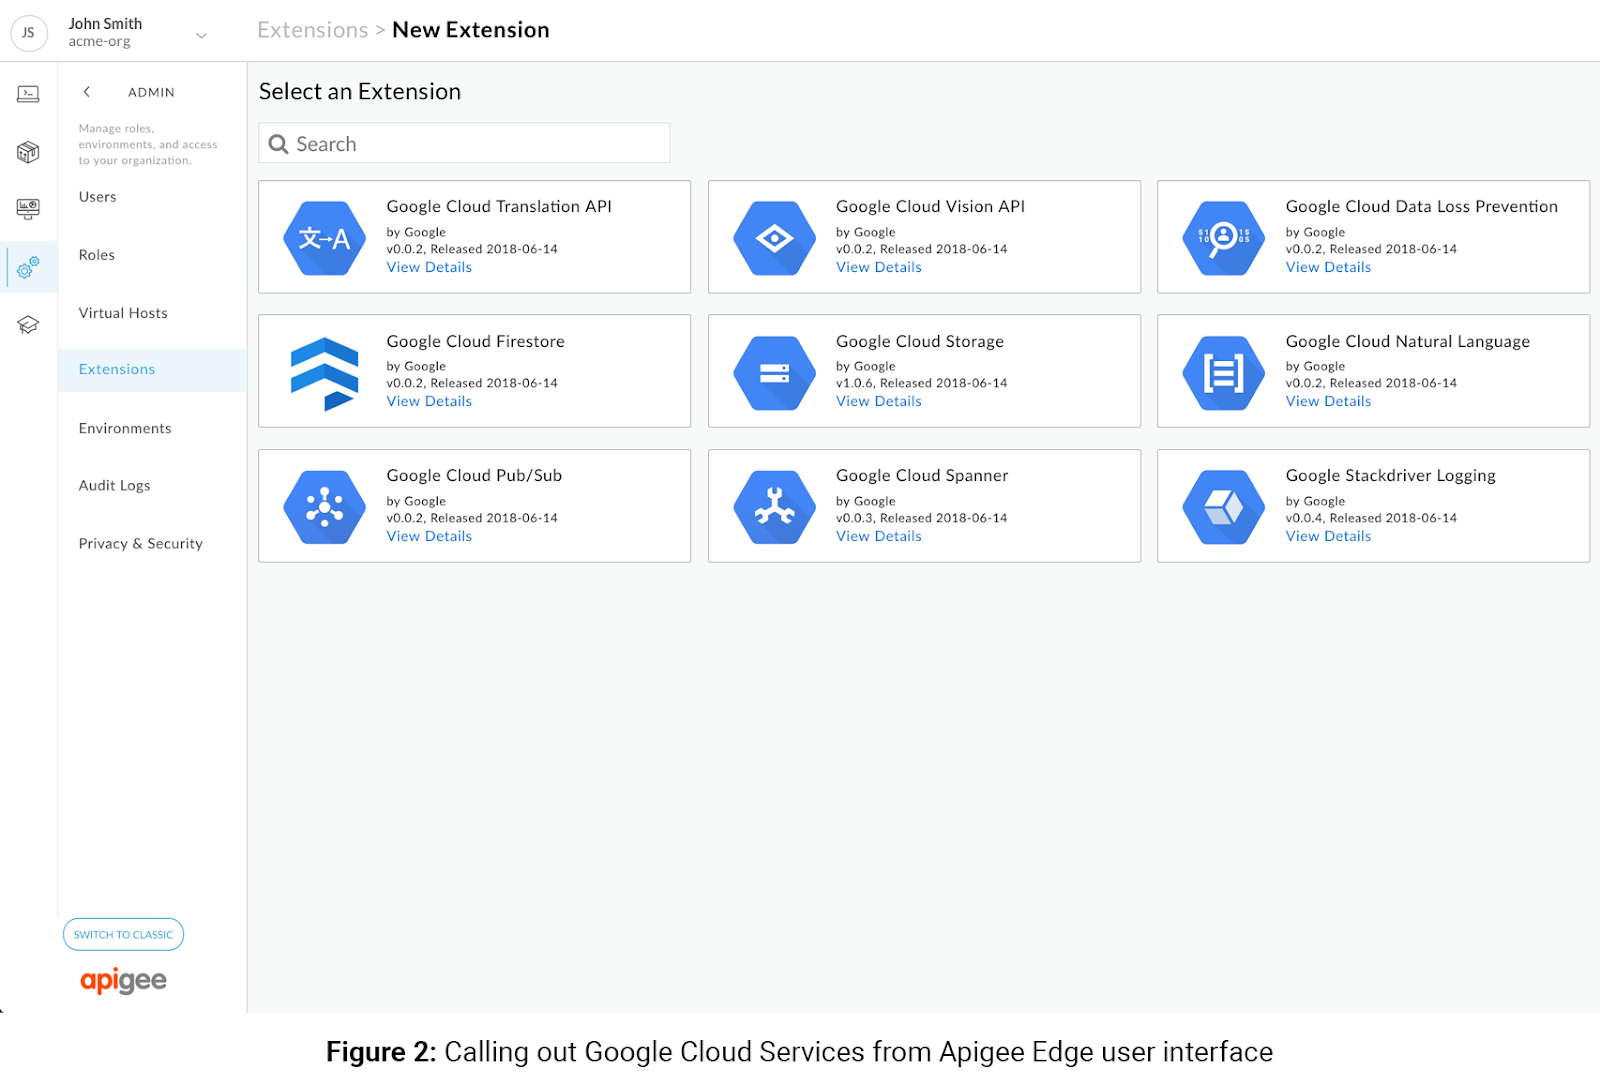 gcp_calling_out_google_cloud_services_from_apigee_edge.png